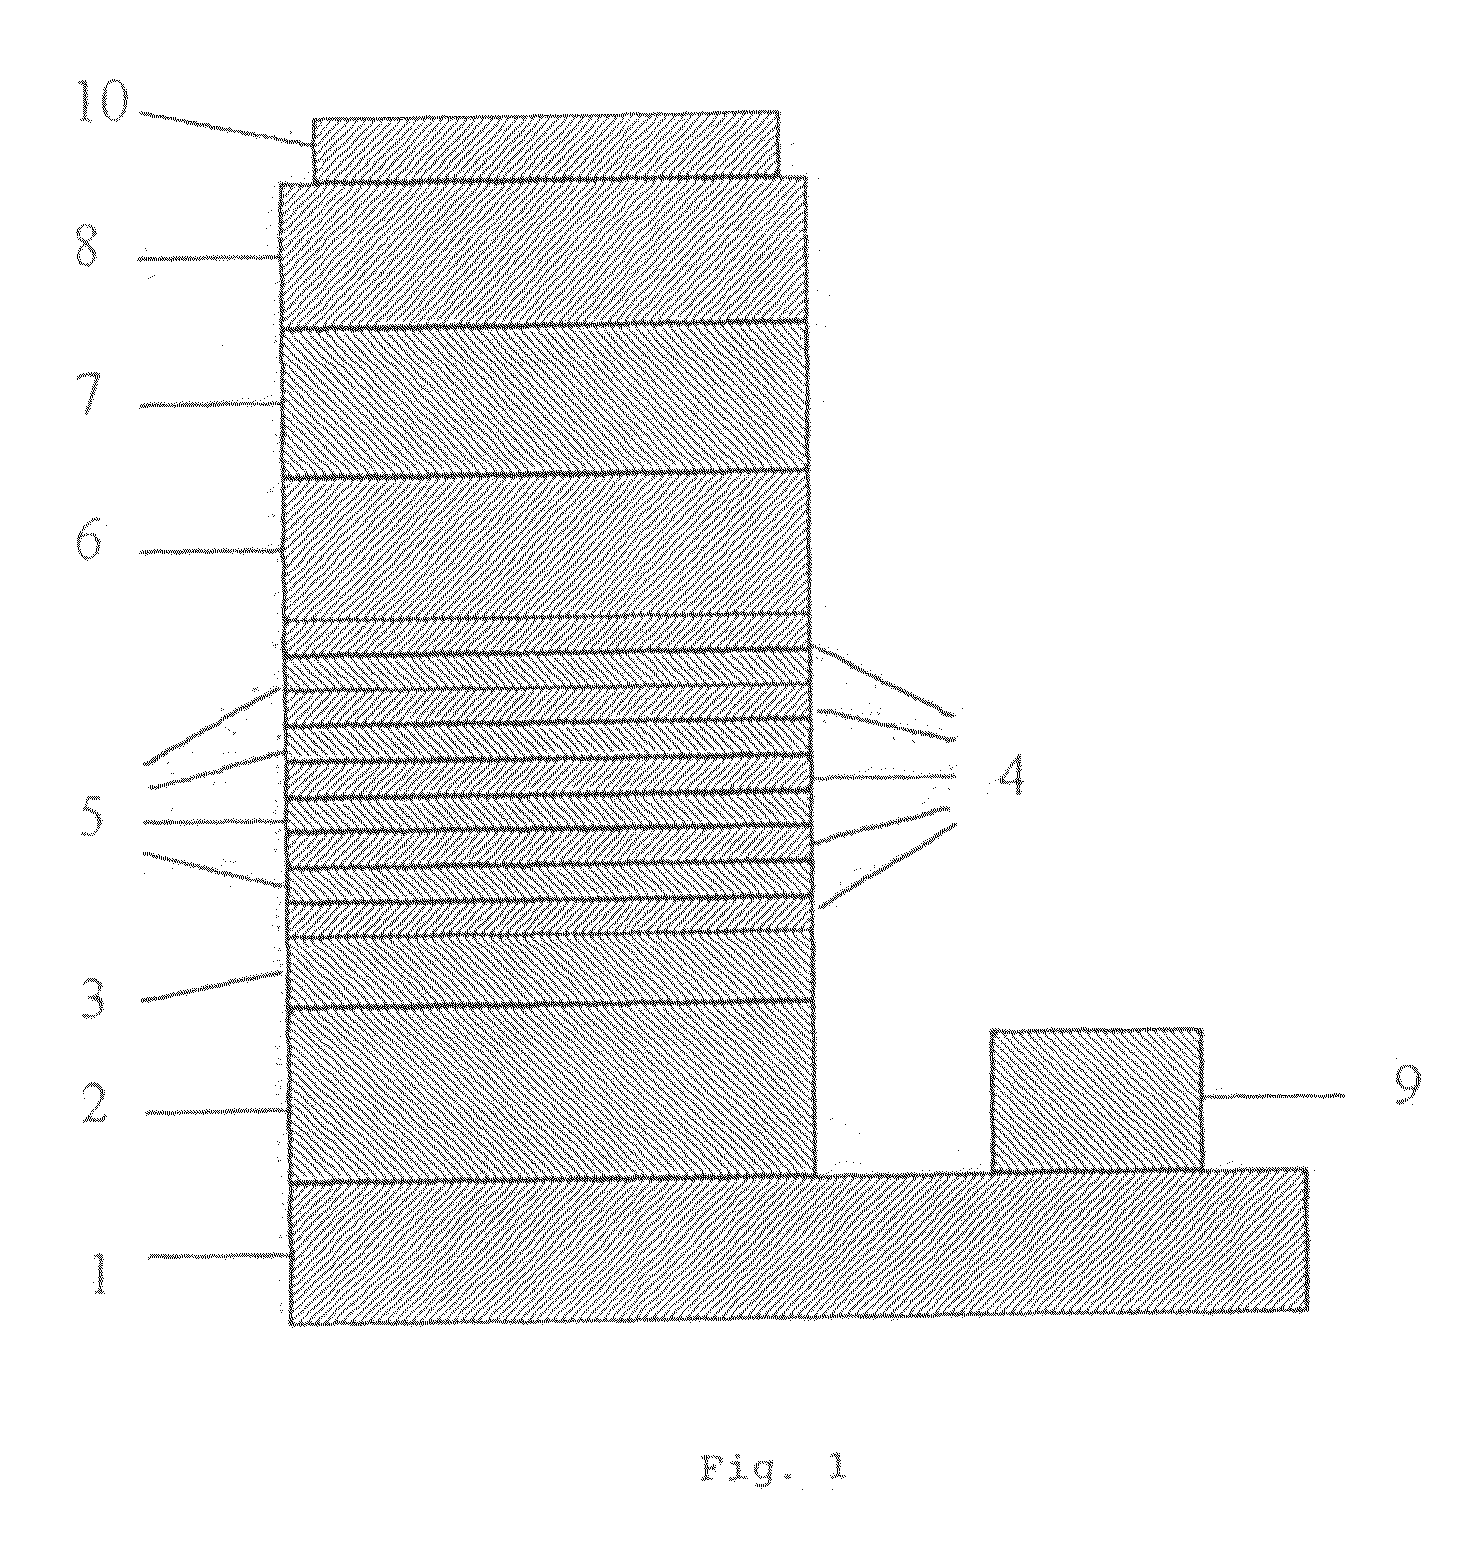 Group lll-V compound semiconductor and a method for producing the same